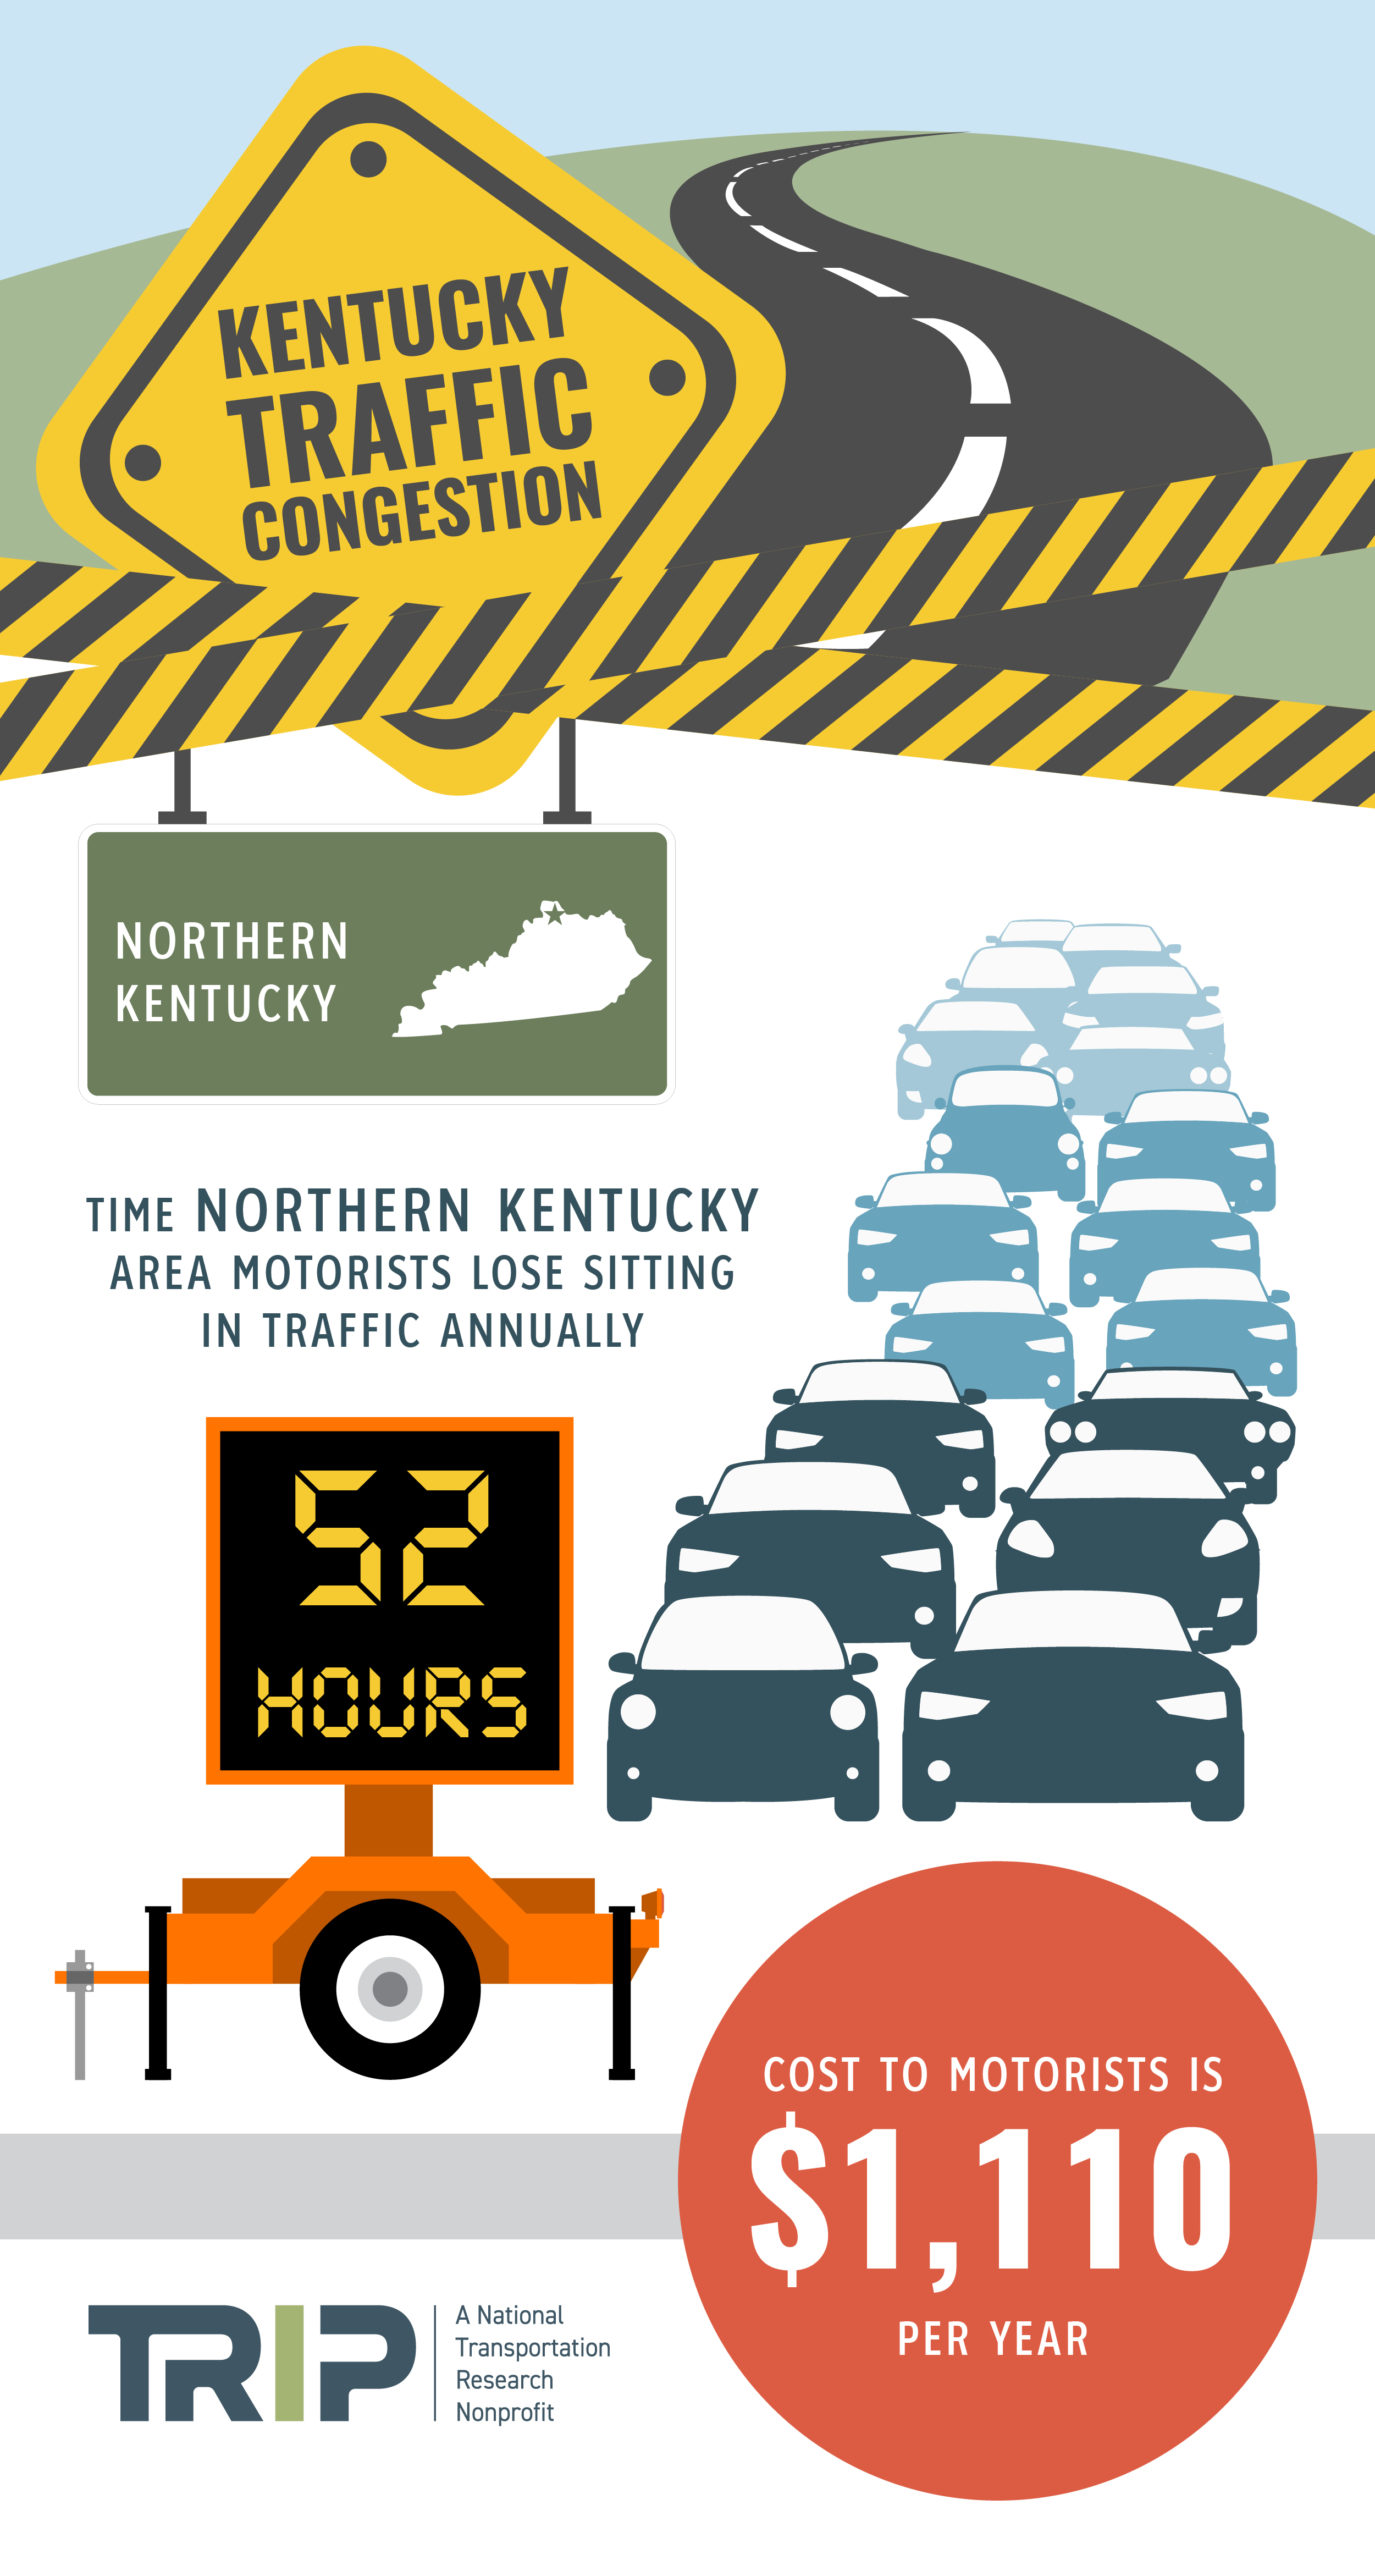 Northern Kentucky Traffic Congestion Infographic – March 2020